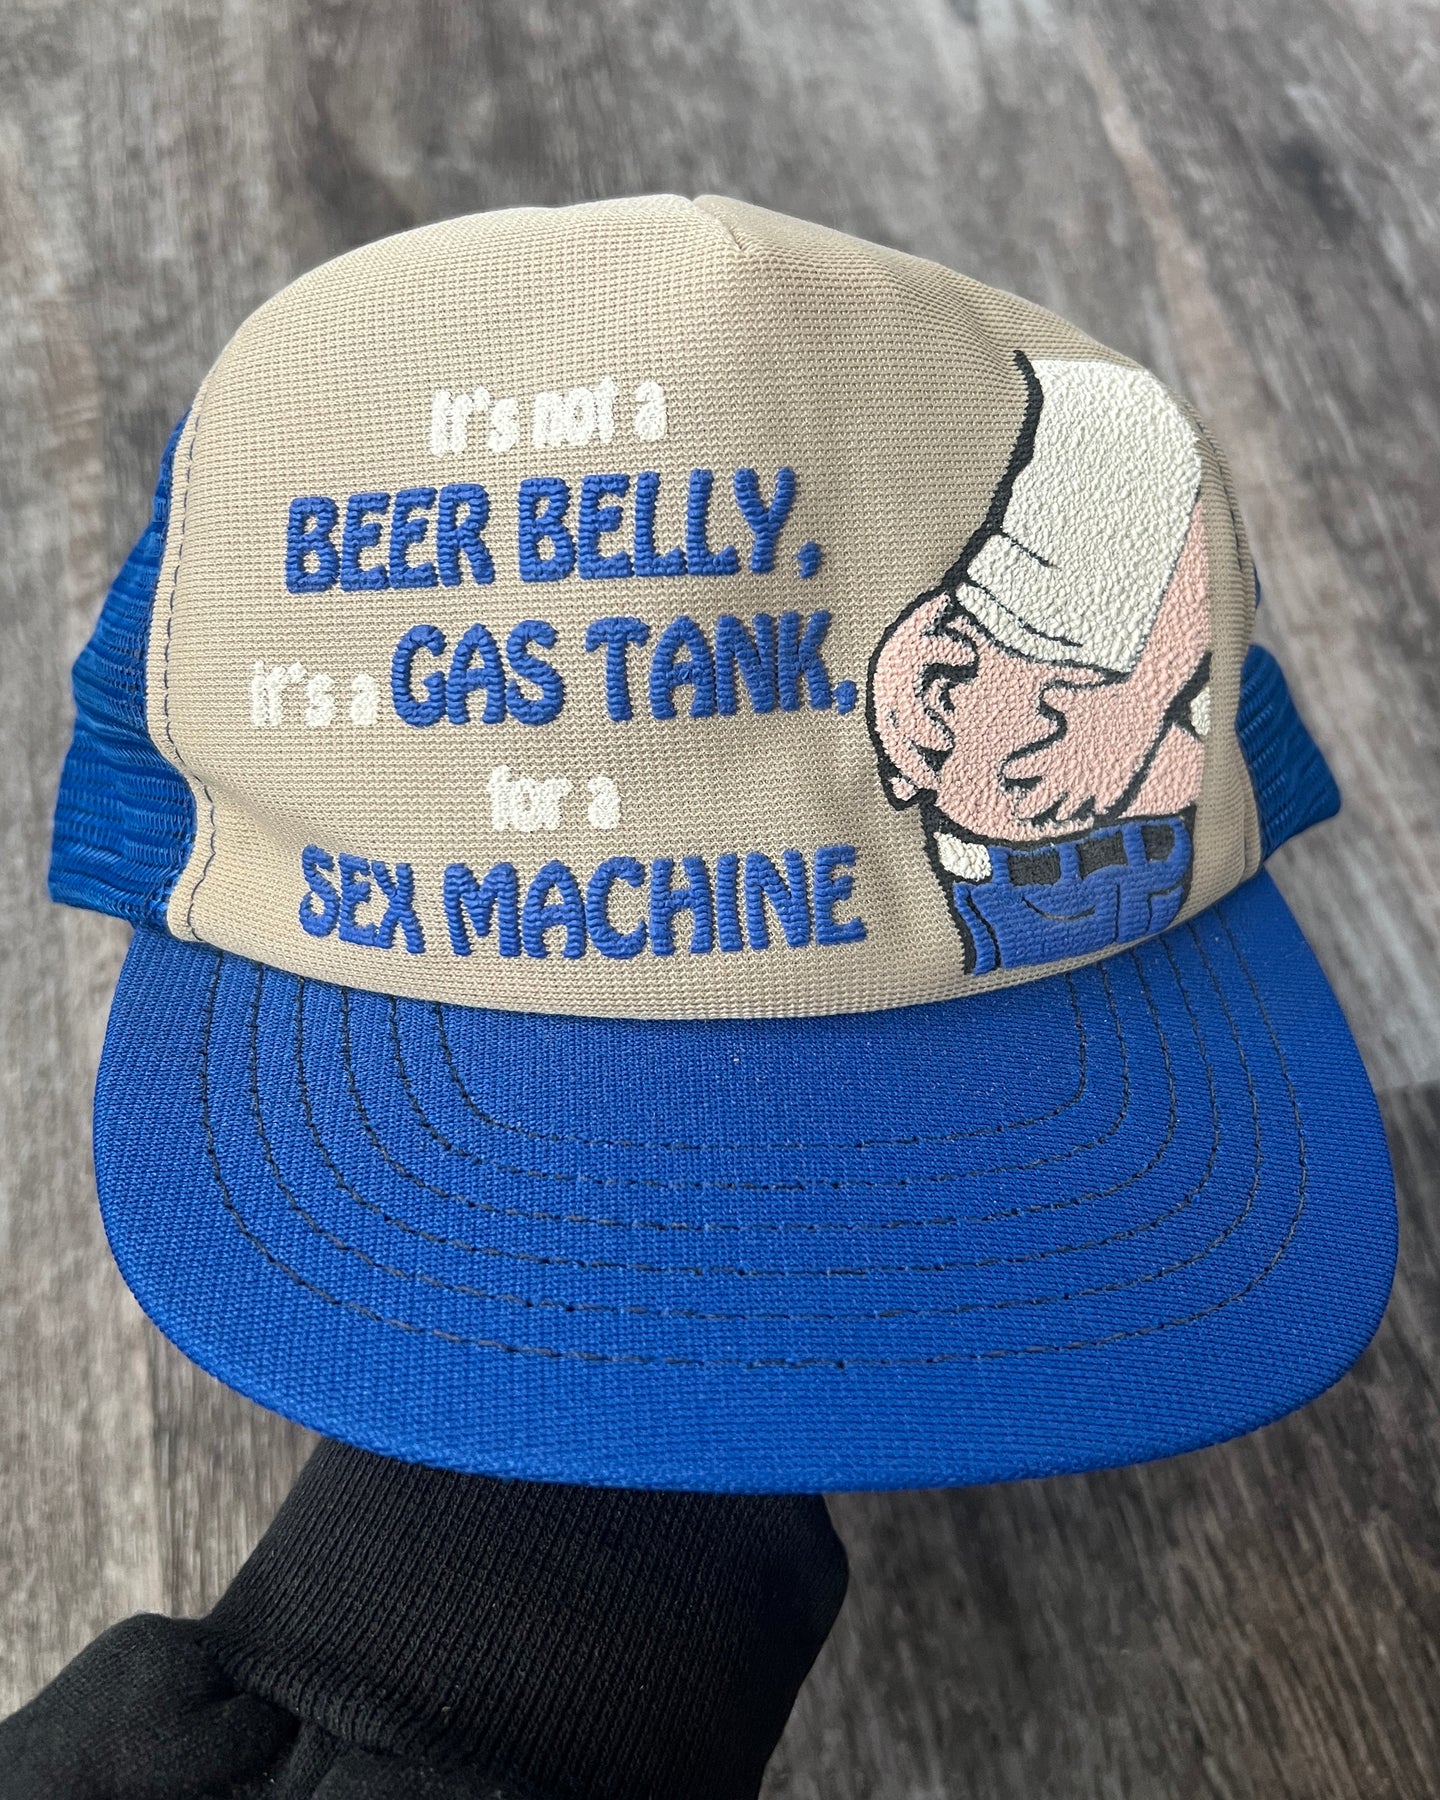 1980s Gas Tank for A Sex Machine Snapback Trucker - One Size